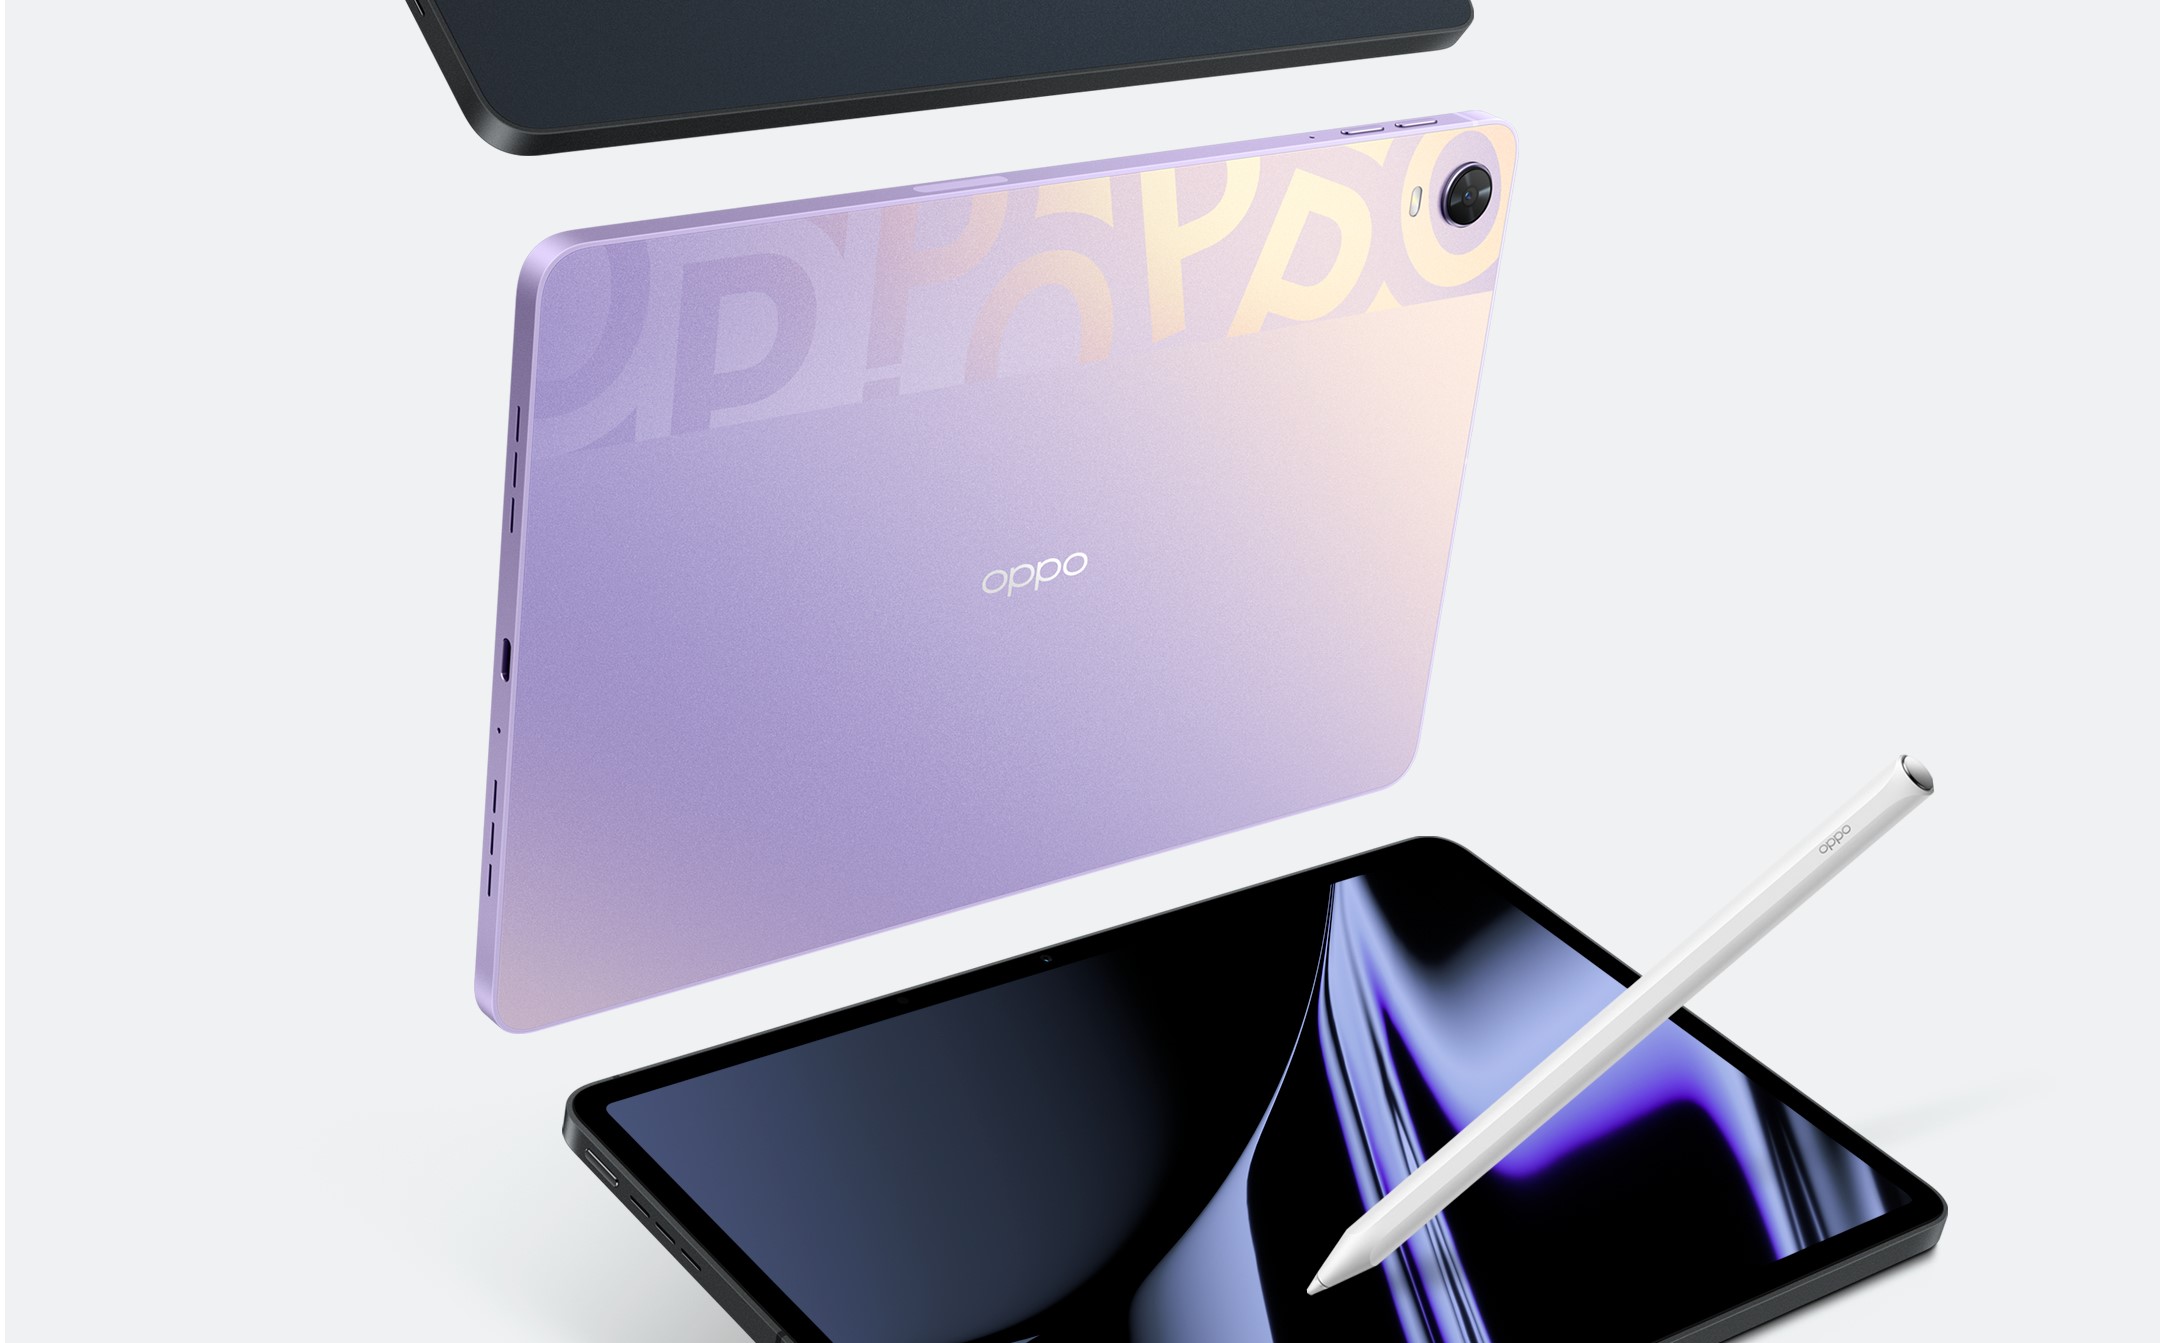 Oppo launches new Pad 2 tablet which offers a unique viewing experience -  Tech Guide